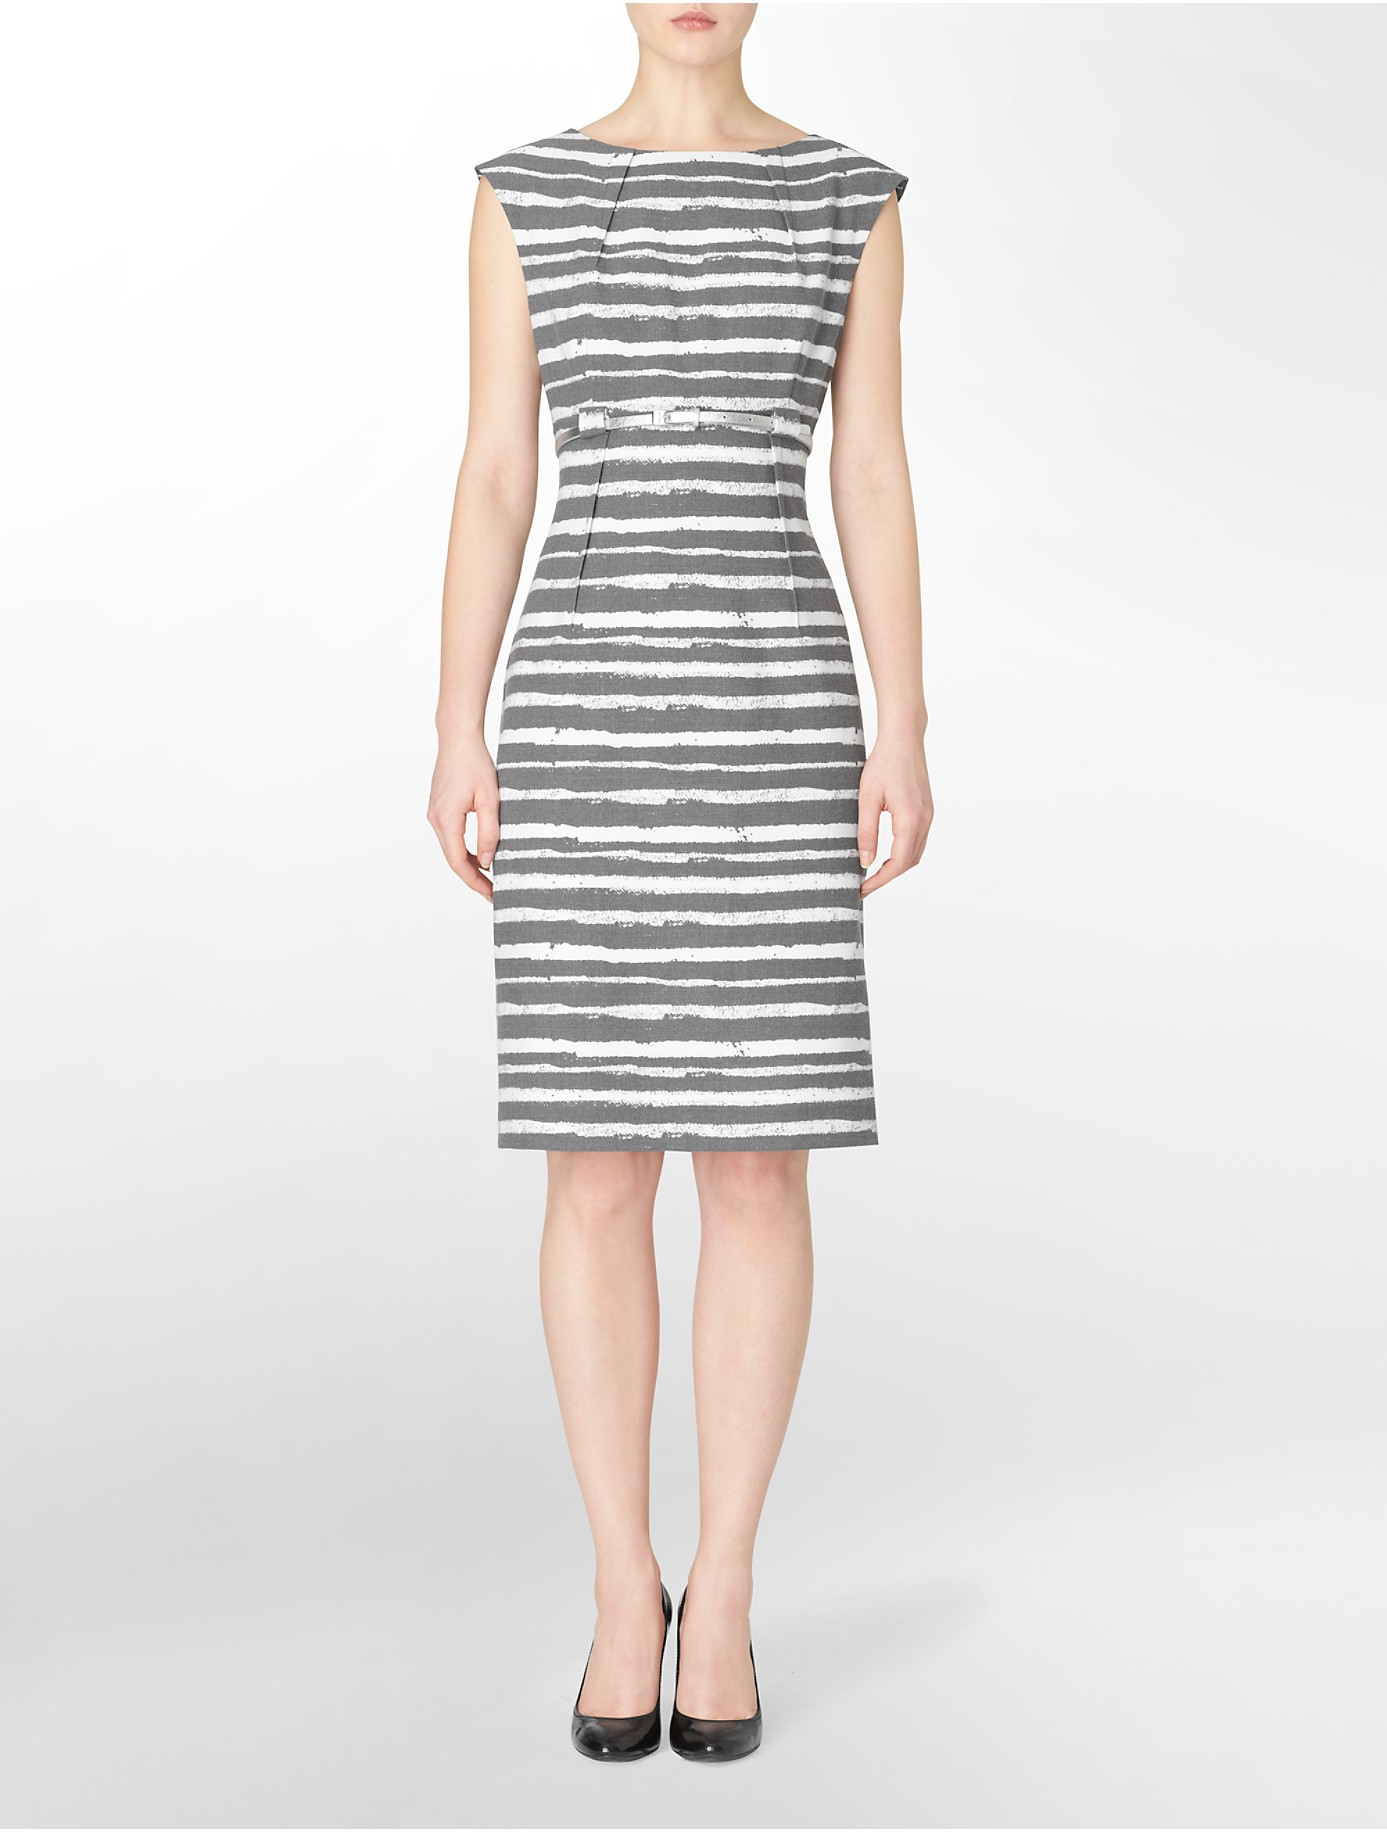 Calvin Klein White Label Pleated + Belted Striped Sheath Dress in Gray |  Lyst